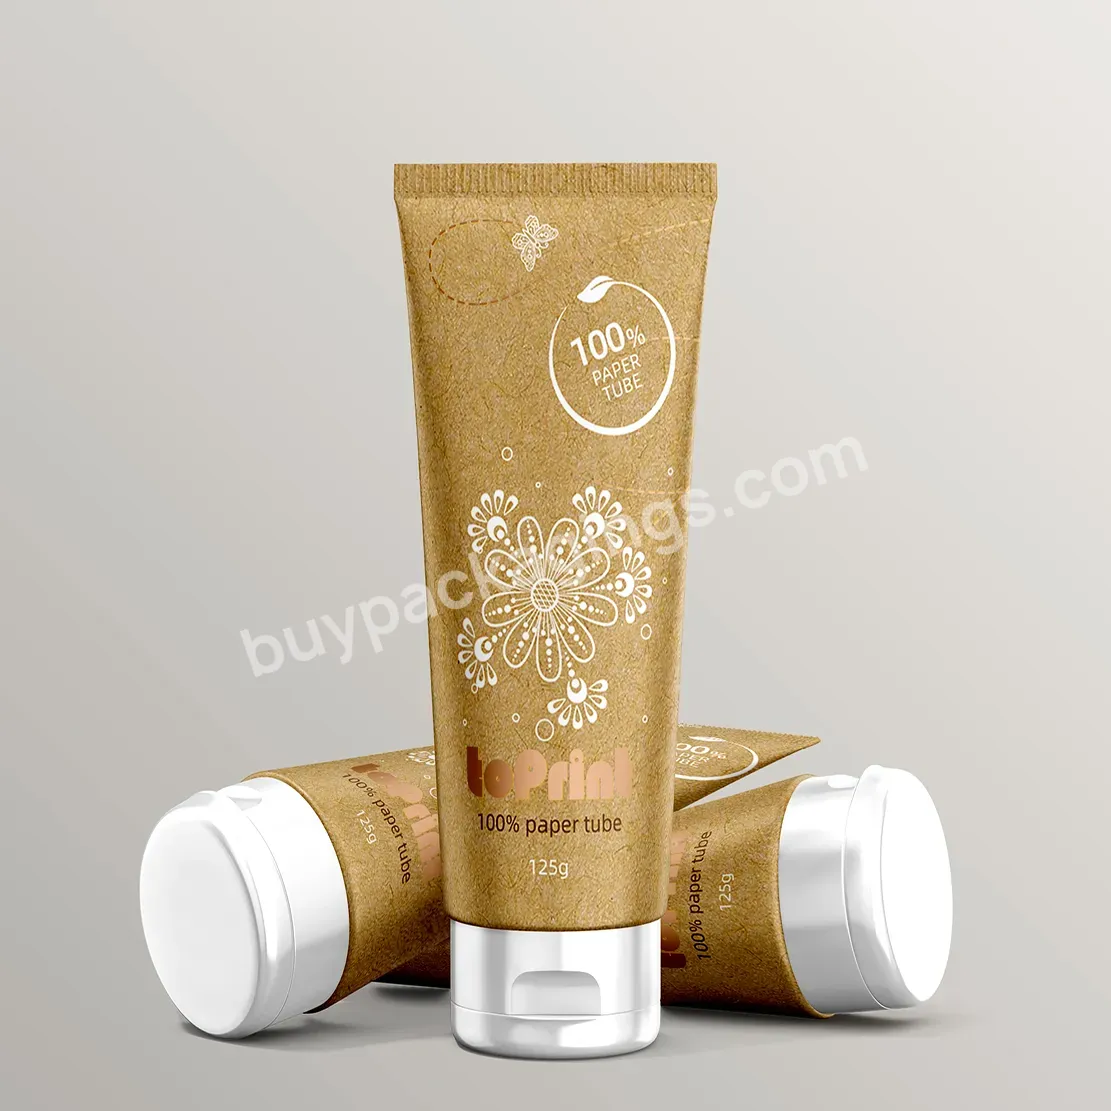 Biodegradable Facial Cleanser Paper Soft Tube Packaging Eco Friendly Face Cream Cosmetic Kraft Cardboard Packaging Box - Buy Cleanser Tube Packaging,Soft Tube Packaging Eco Friendly,Face Cream Packaging Box.